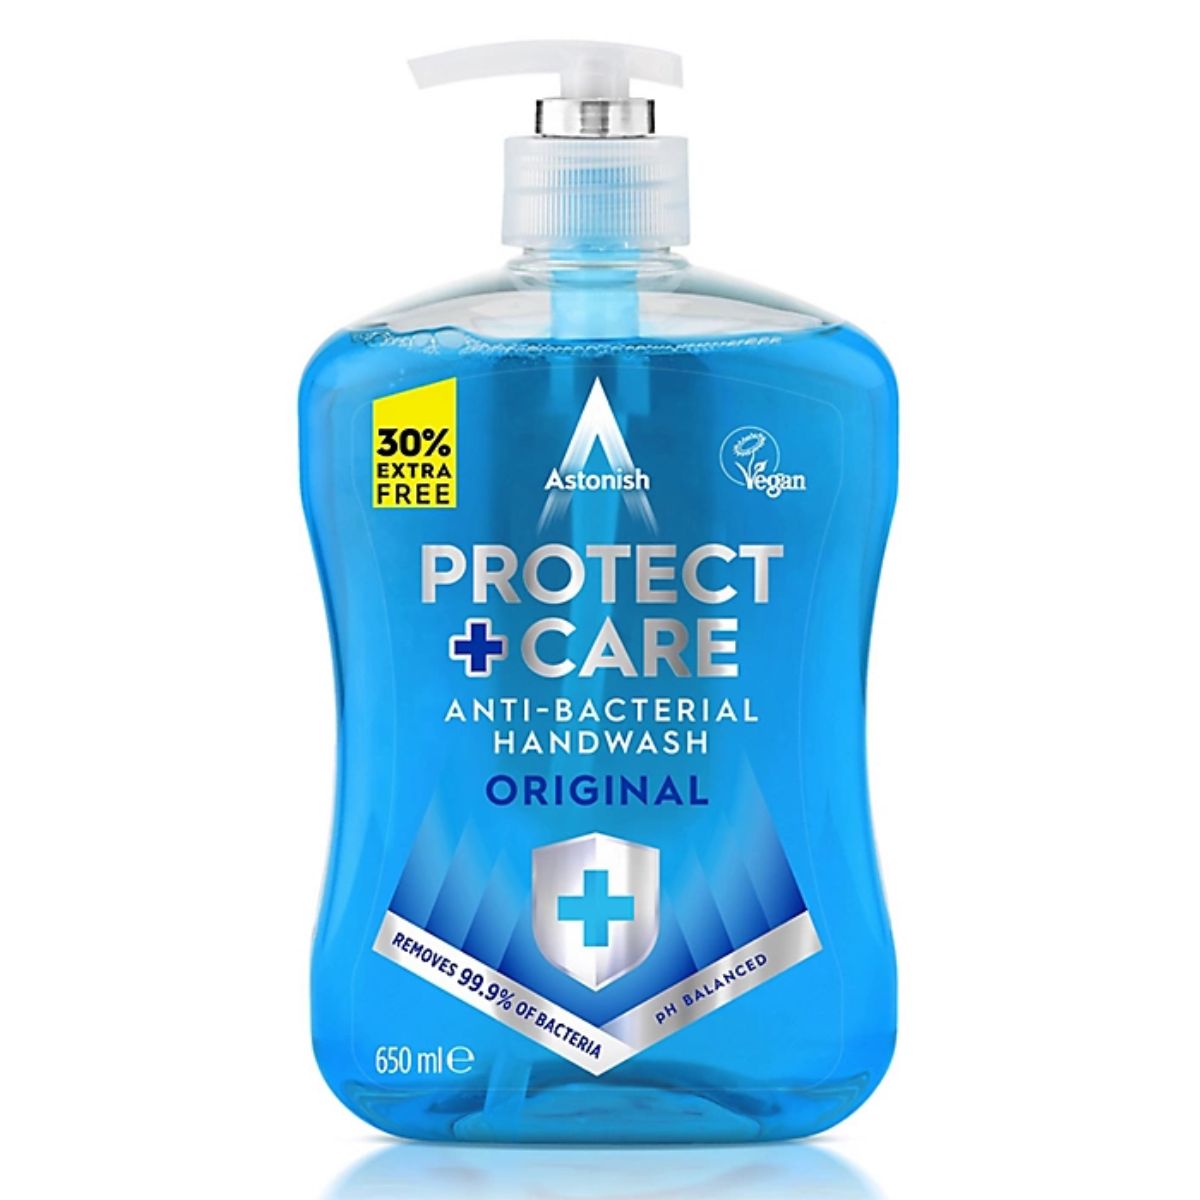 A bottle of Astonish - Protect & Care Anti-Bacterial Liquid Hand Wash - 600ml hand sanitizer.